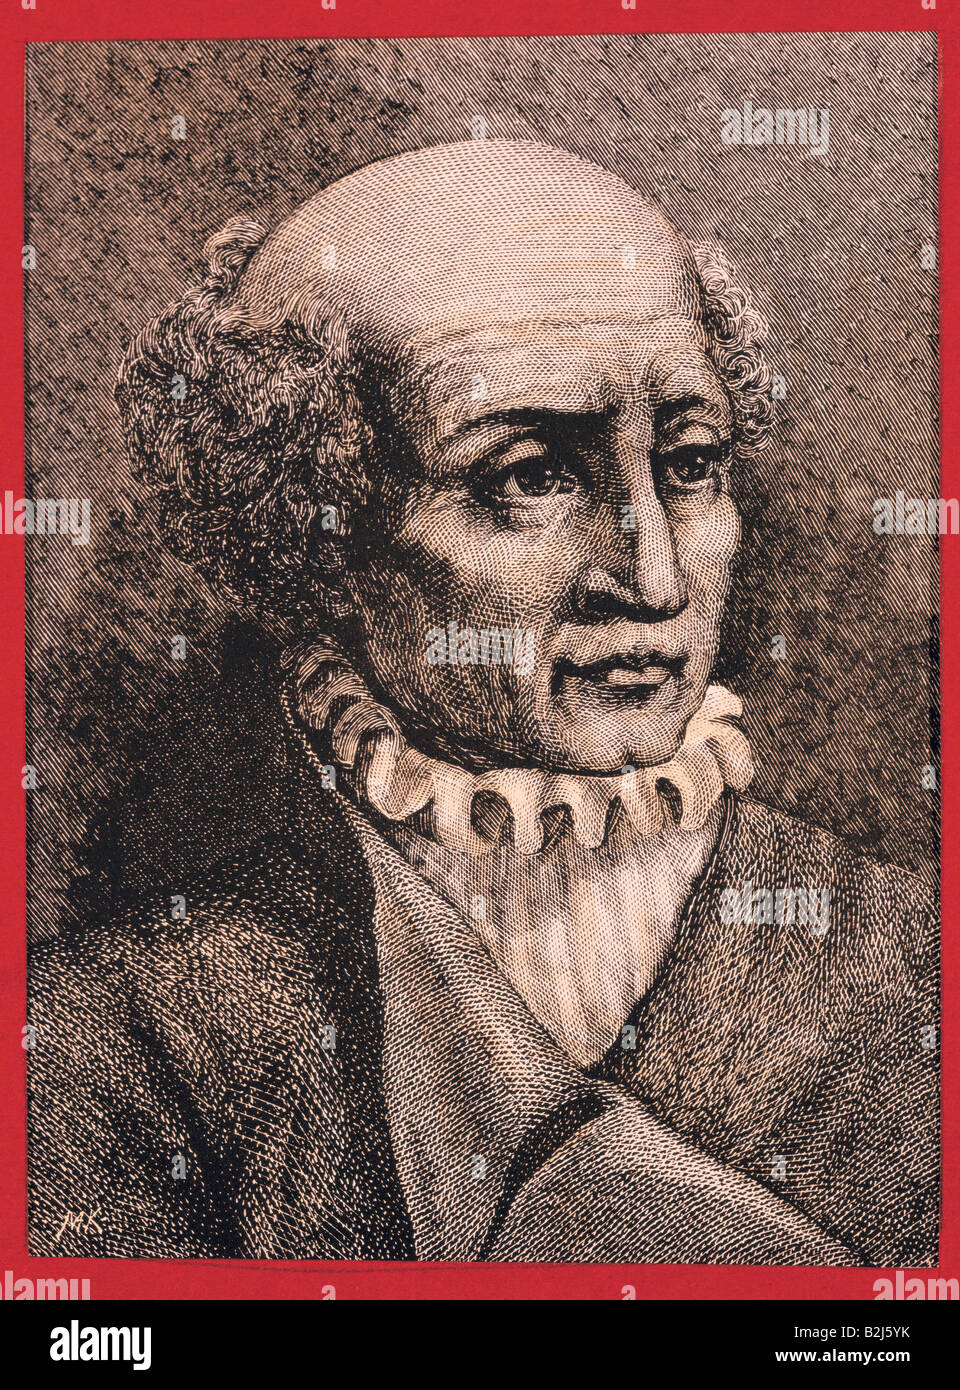 Paracelsus, 1493 - 24.9.1541, Swiss physician and alchemist, portrait, wood engraving by Moritz Klinkicht, circa 1900, private collection, , Stock Photo